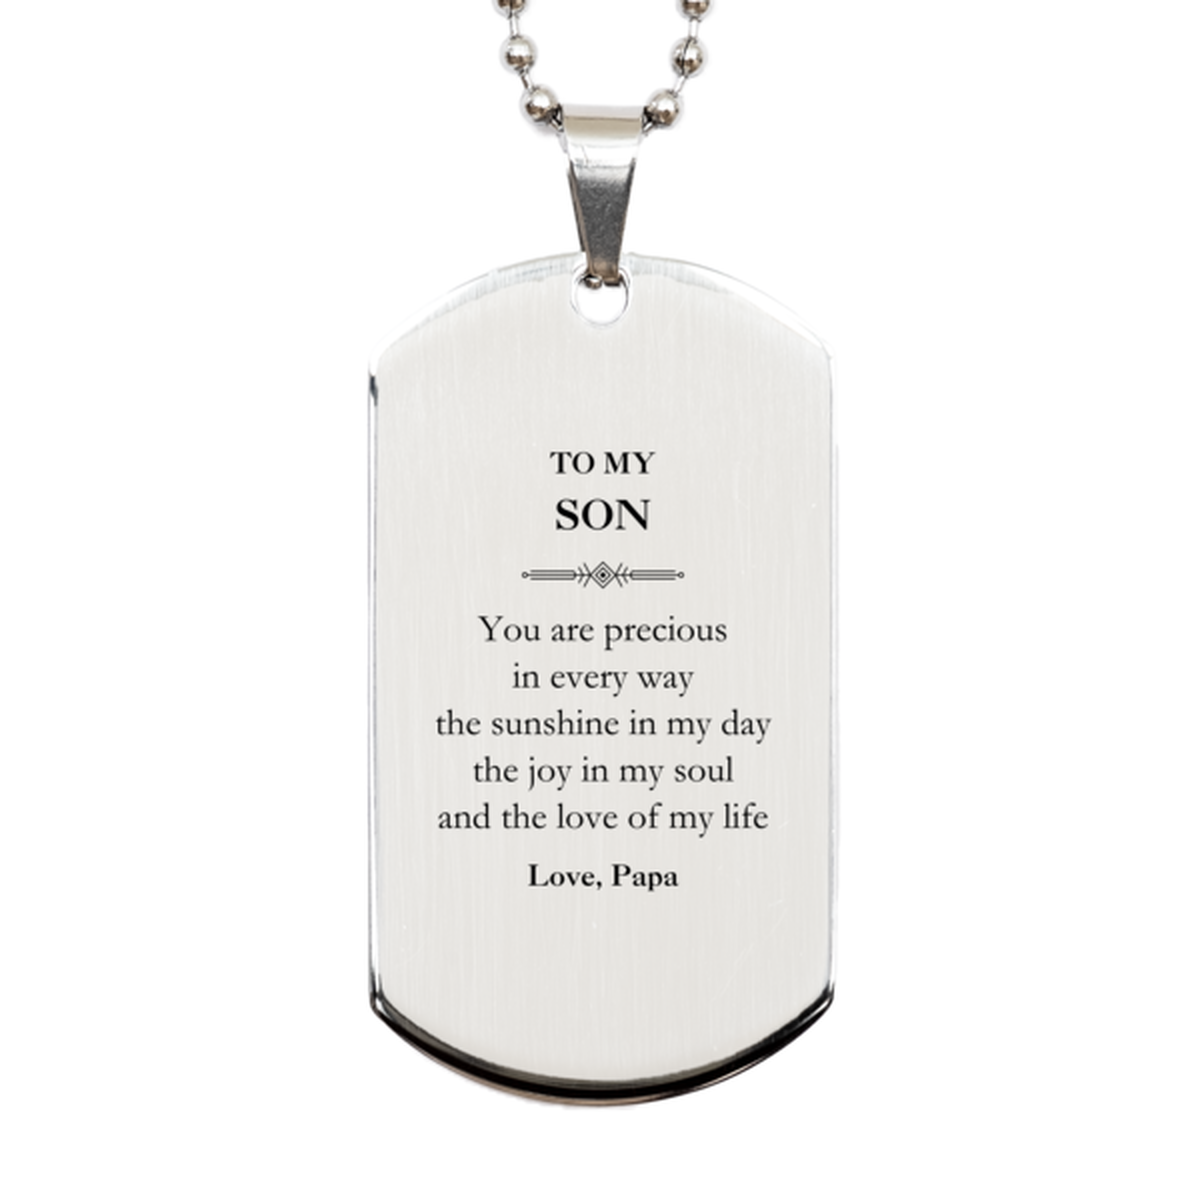 Graduation Gifts for Son Silver Dog Tag Present from Papa, Christmas Son Birthday Gifts Son You are precious in every way the sunshine in my day. Love, Papa